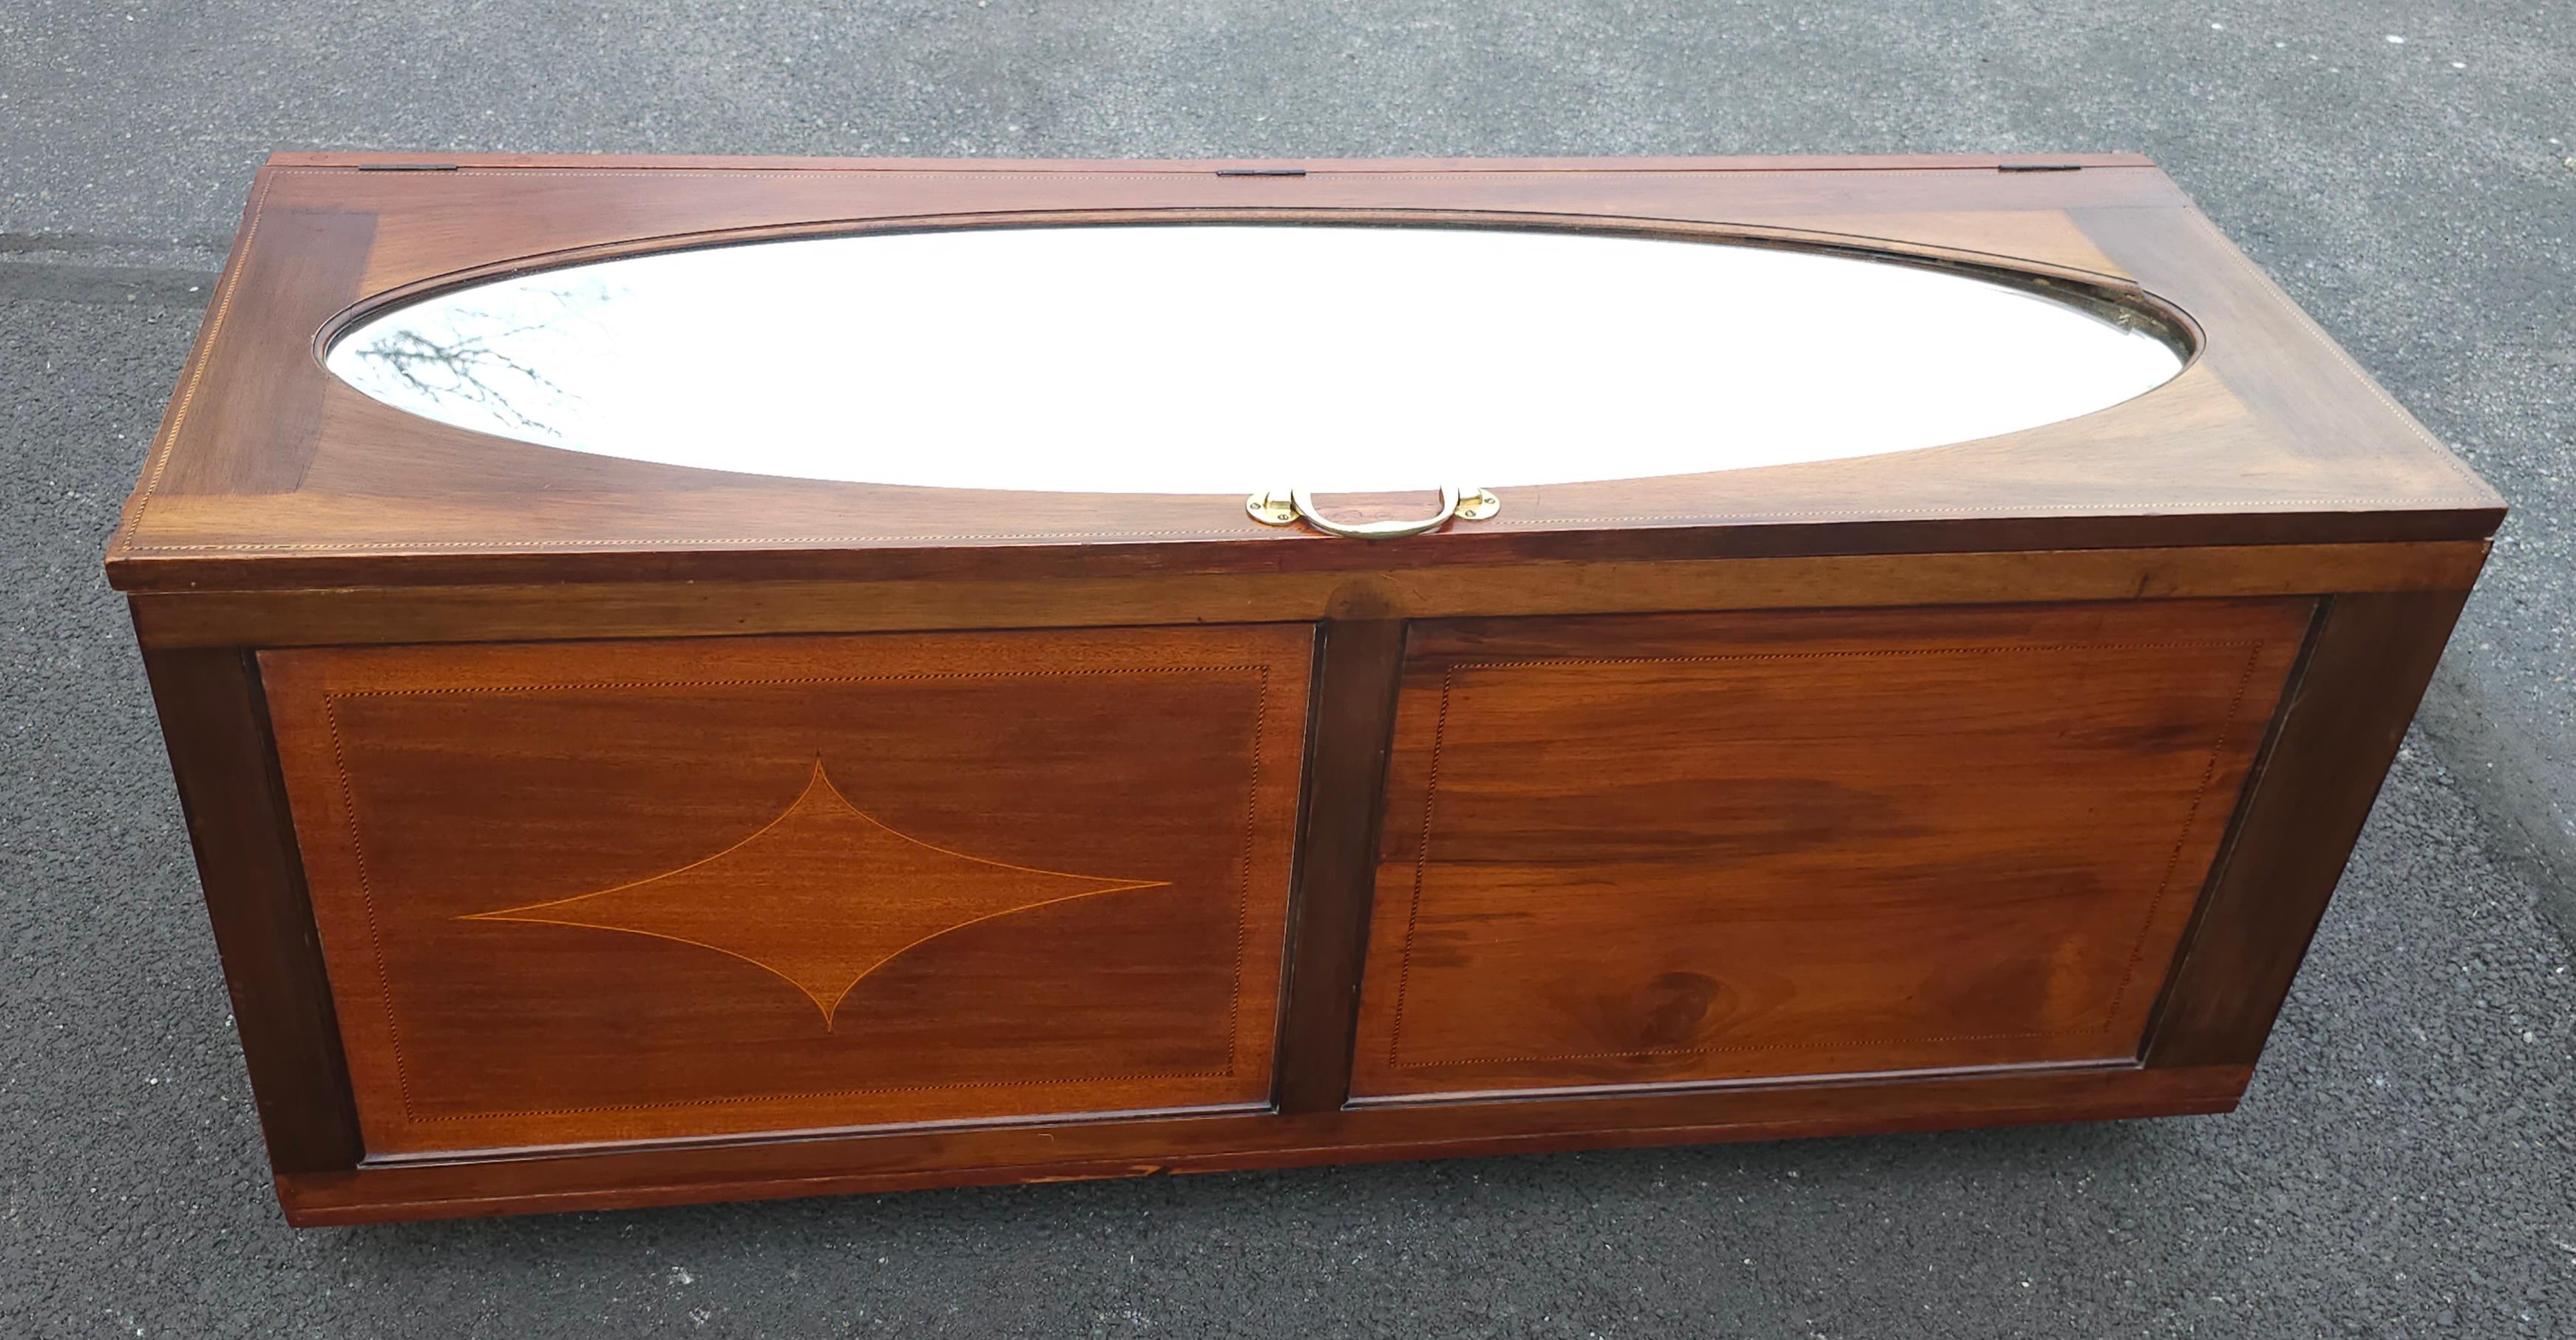 19th C. English Mahogany Marquetry Inlaid & Mirrored Top Blanket Chest on Wheels For Sale 5